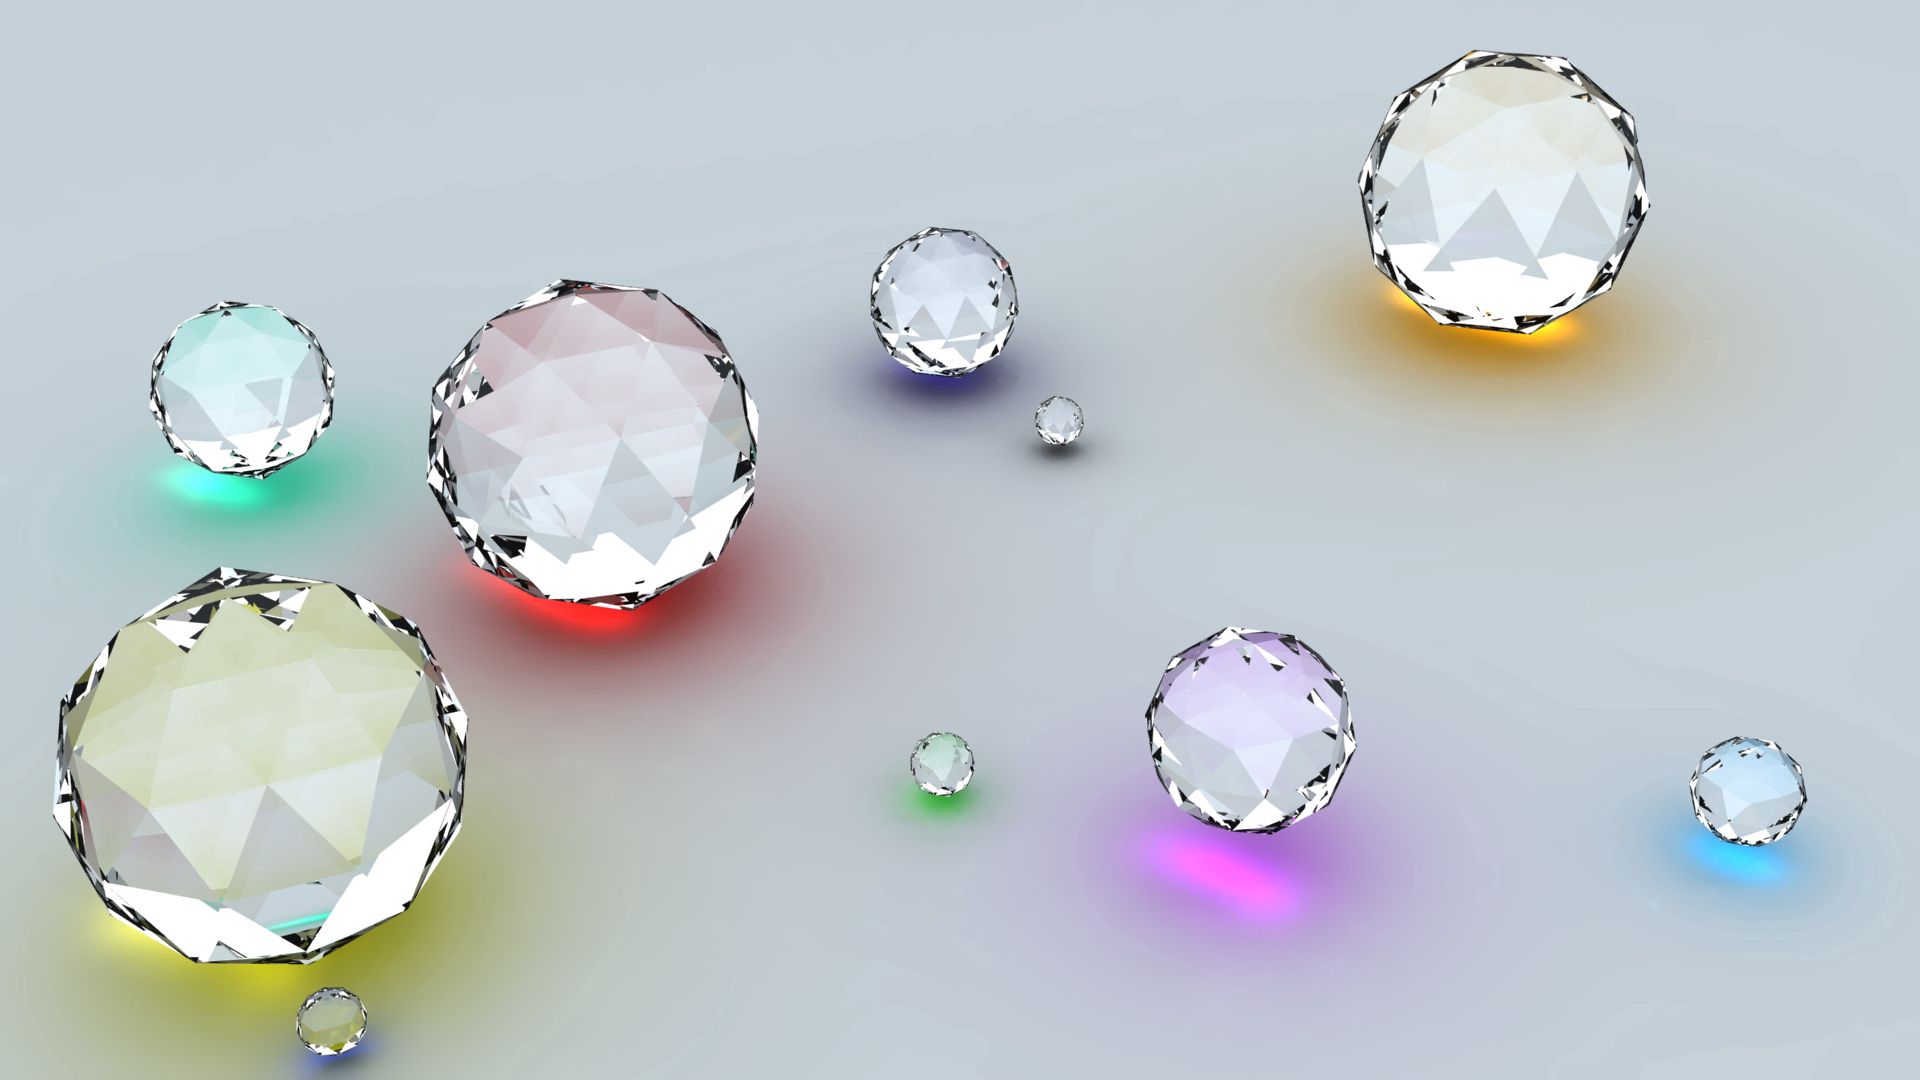 149392 2560x1080 PC pictures for free, download 3d, diamonds, reflection, surface 2560x1080 wallpapers on your desktop